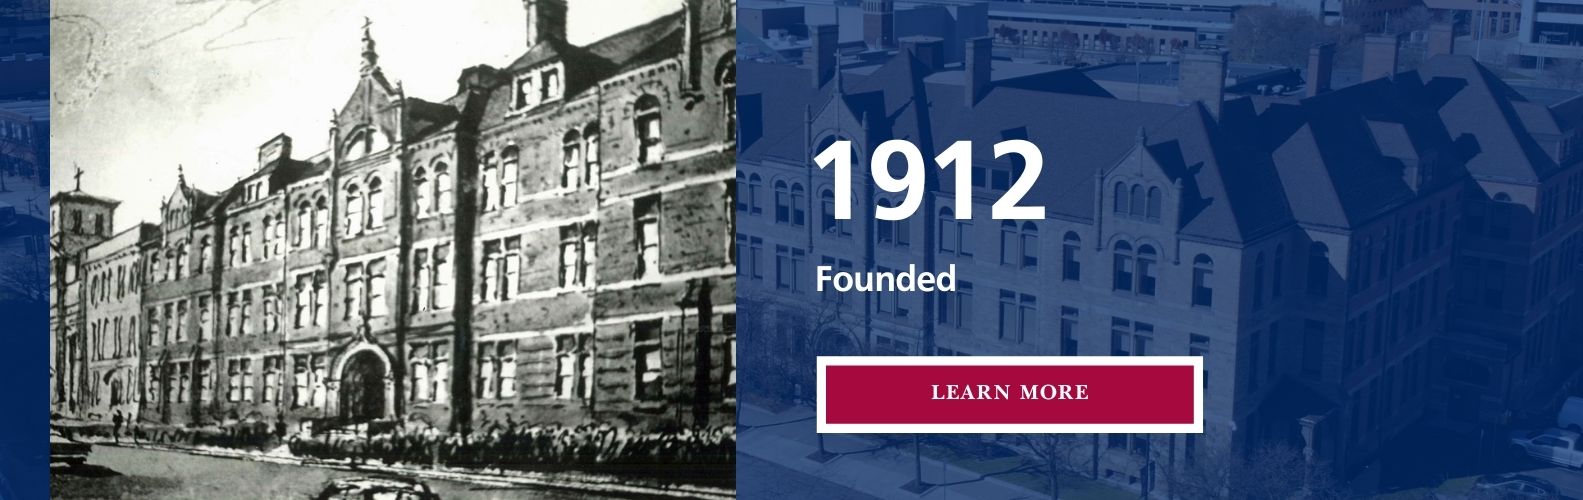 Founded in 1912 Archive photo of Detroit Mercy Law